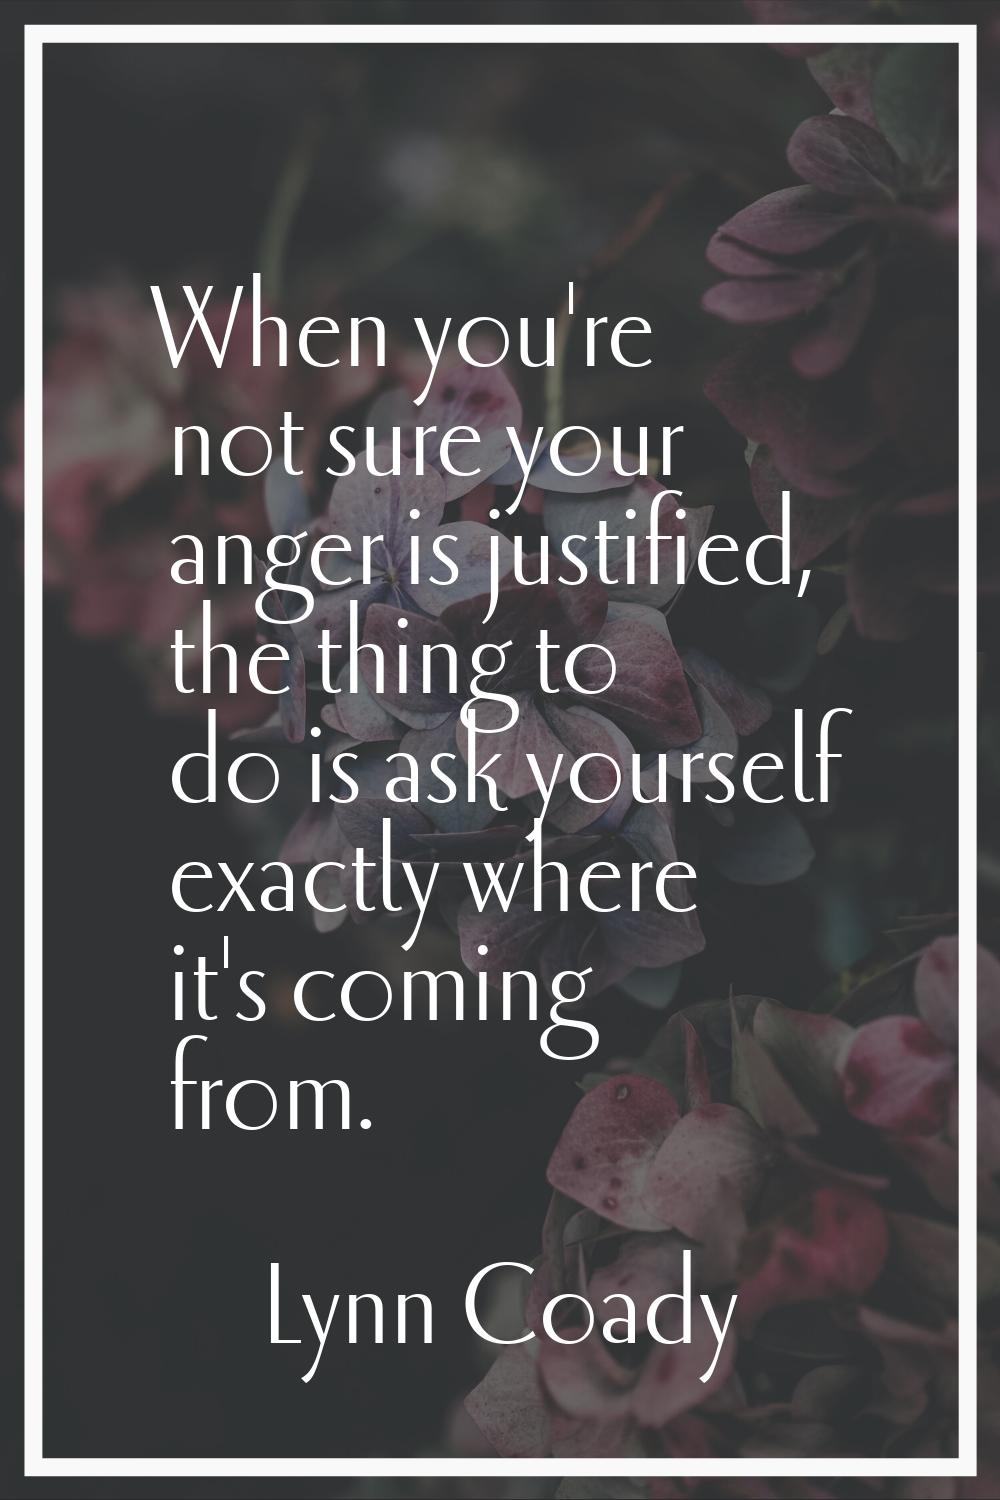 When you're not sure your anger is justified, the thing to do is ask yourself exactly where it's co